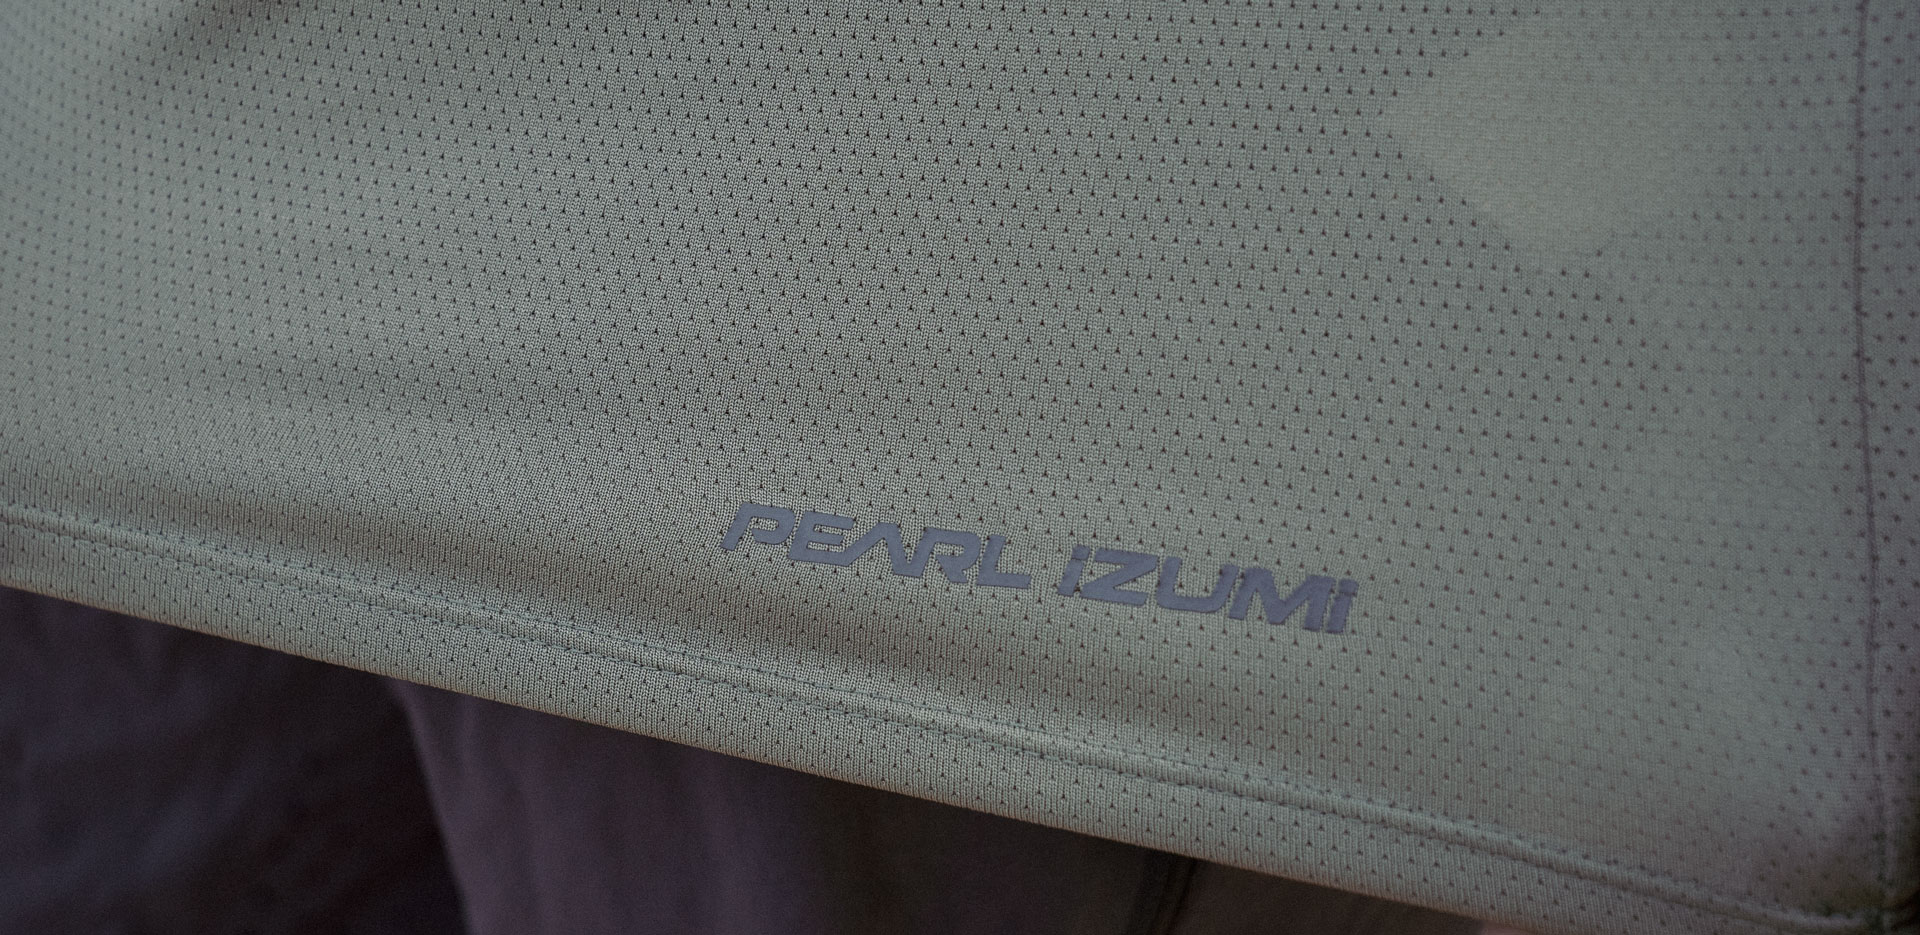 Pearl Izumi Summit Shell Short and Jersey Review